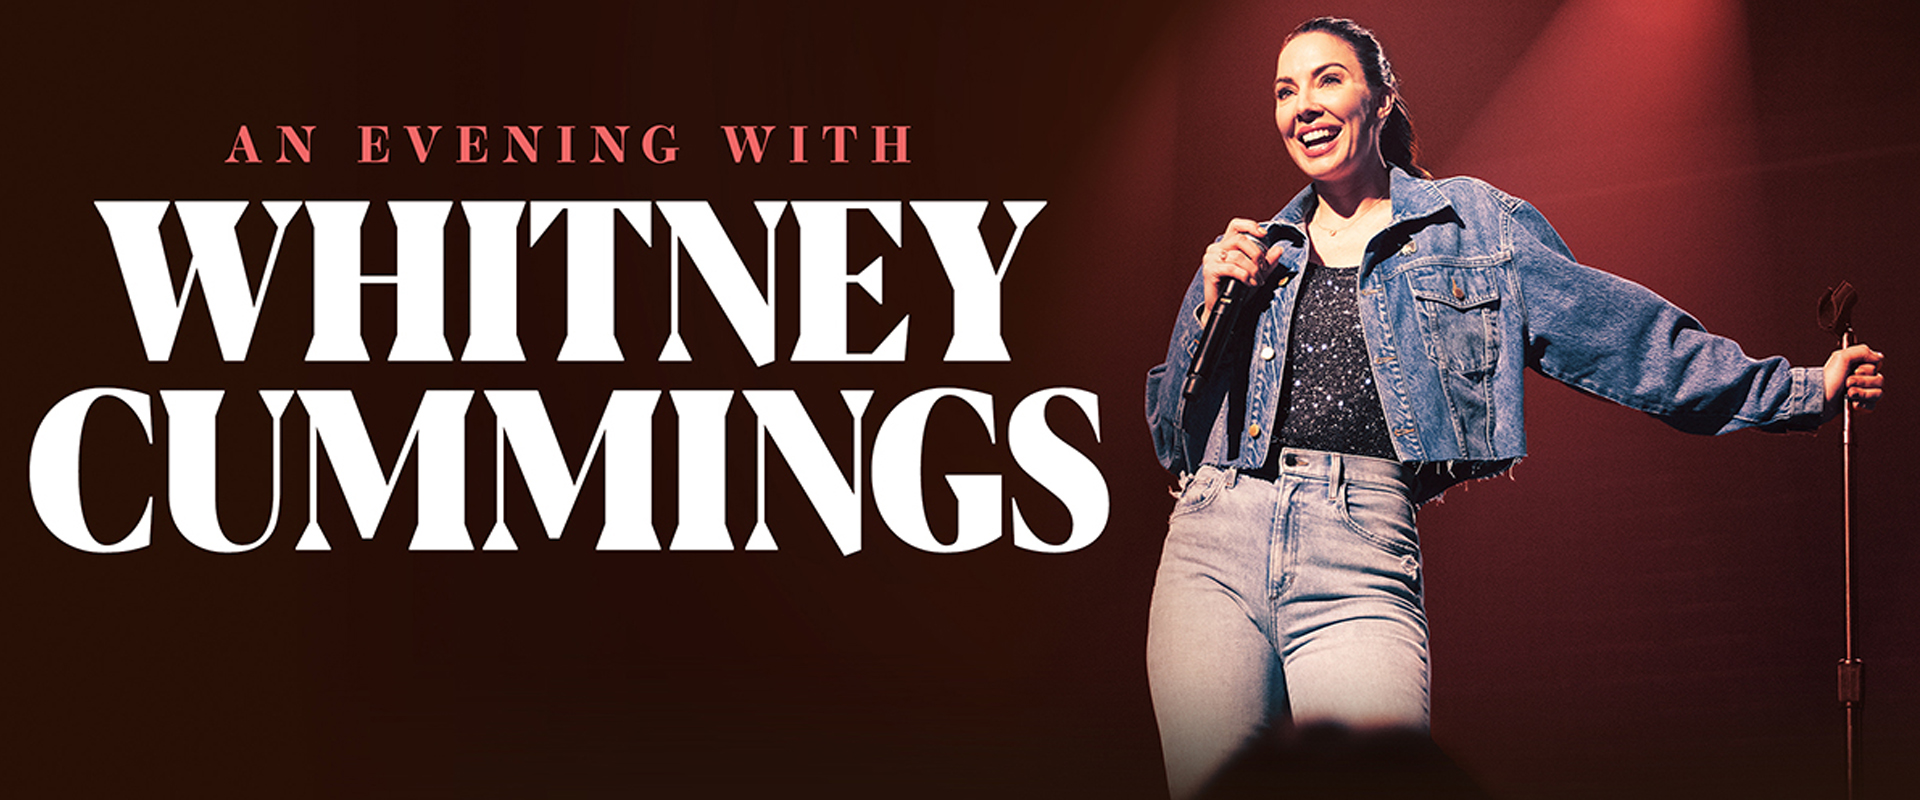 An Evening with Whitney Cummings